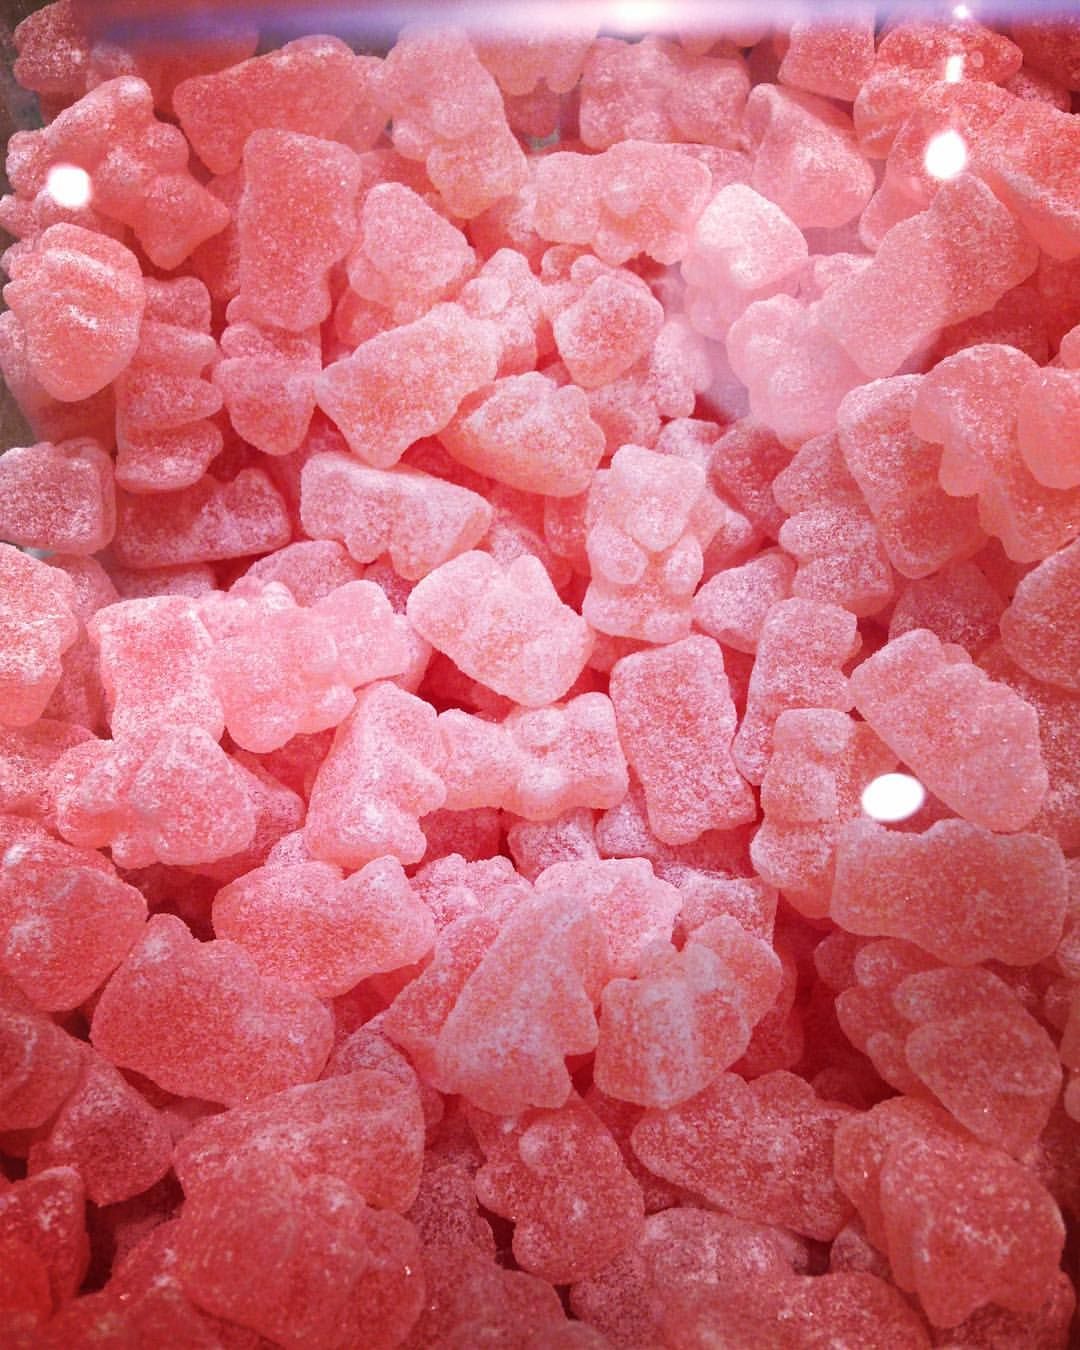 A Pink Sea Of Ros Gummy Bears I Know What Ll Be Dreaming About